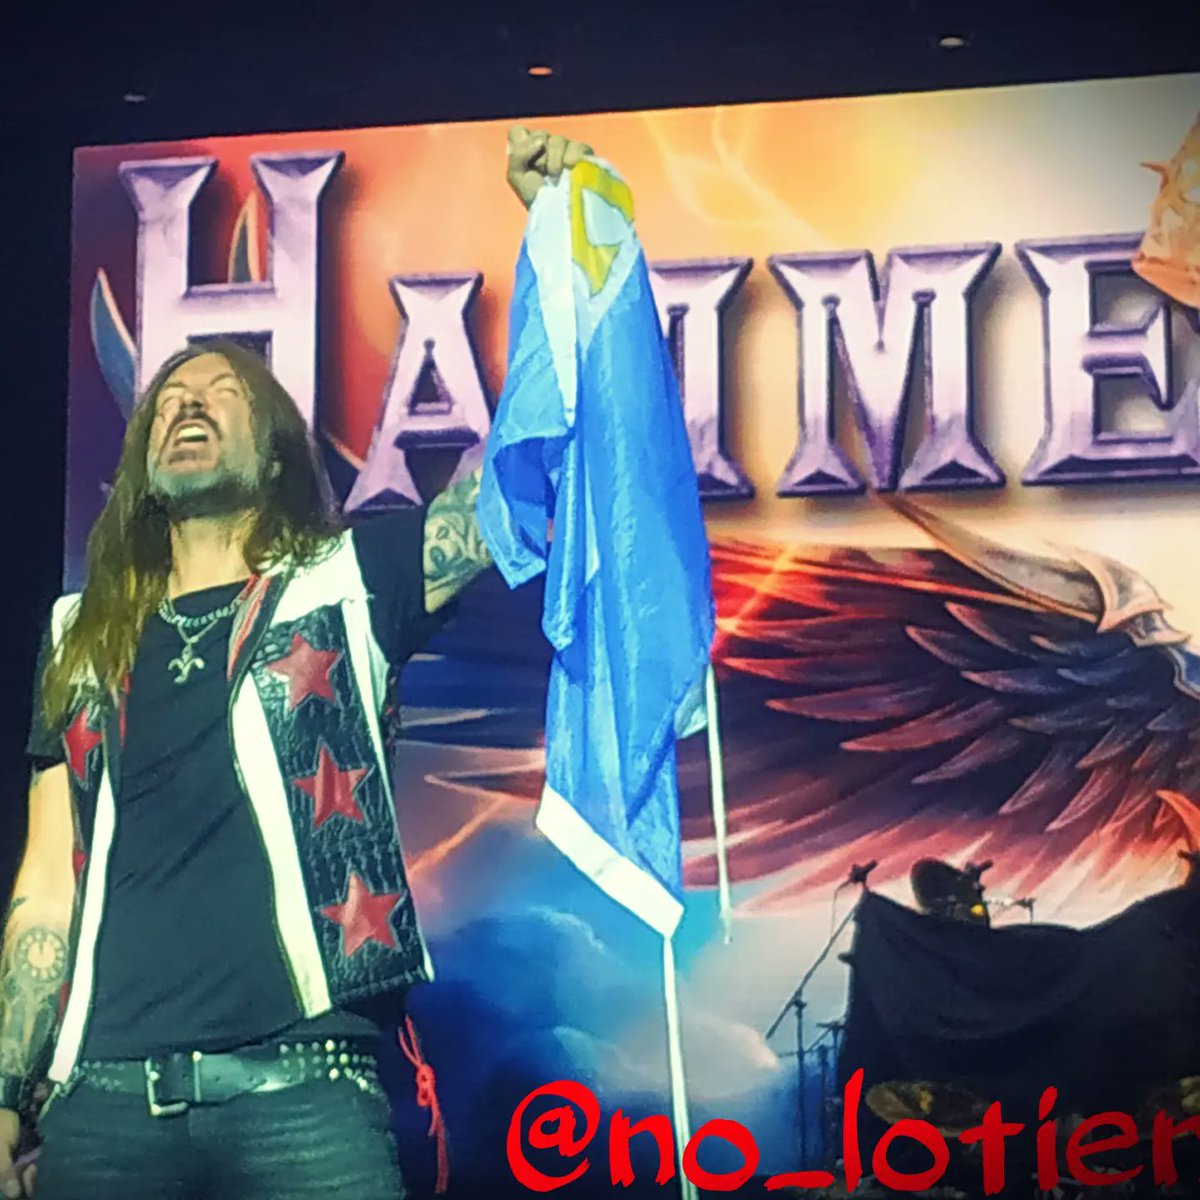 #JoacimsCans raising the flag that I specially made for them. Unforgettable night with @HammerFall  @helloweenorg @BetoVazquezInfi #unitedforces Forever grateful @OscarDronjak !